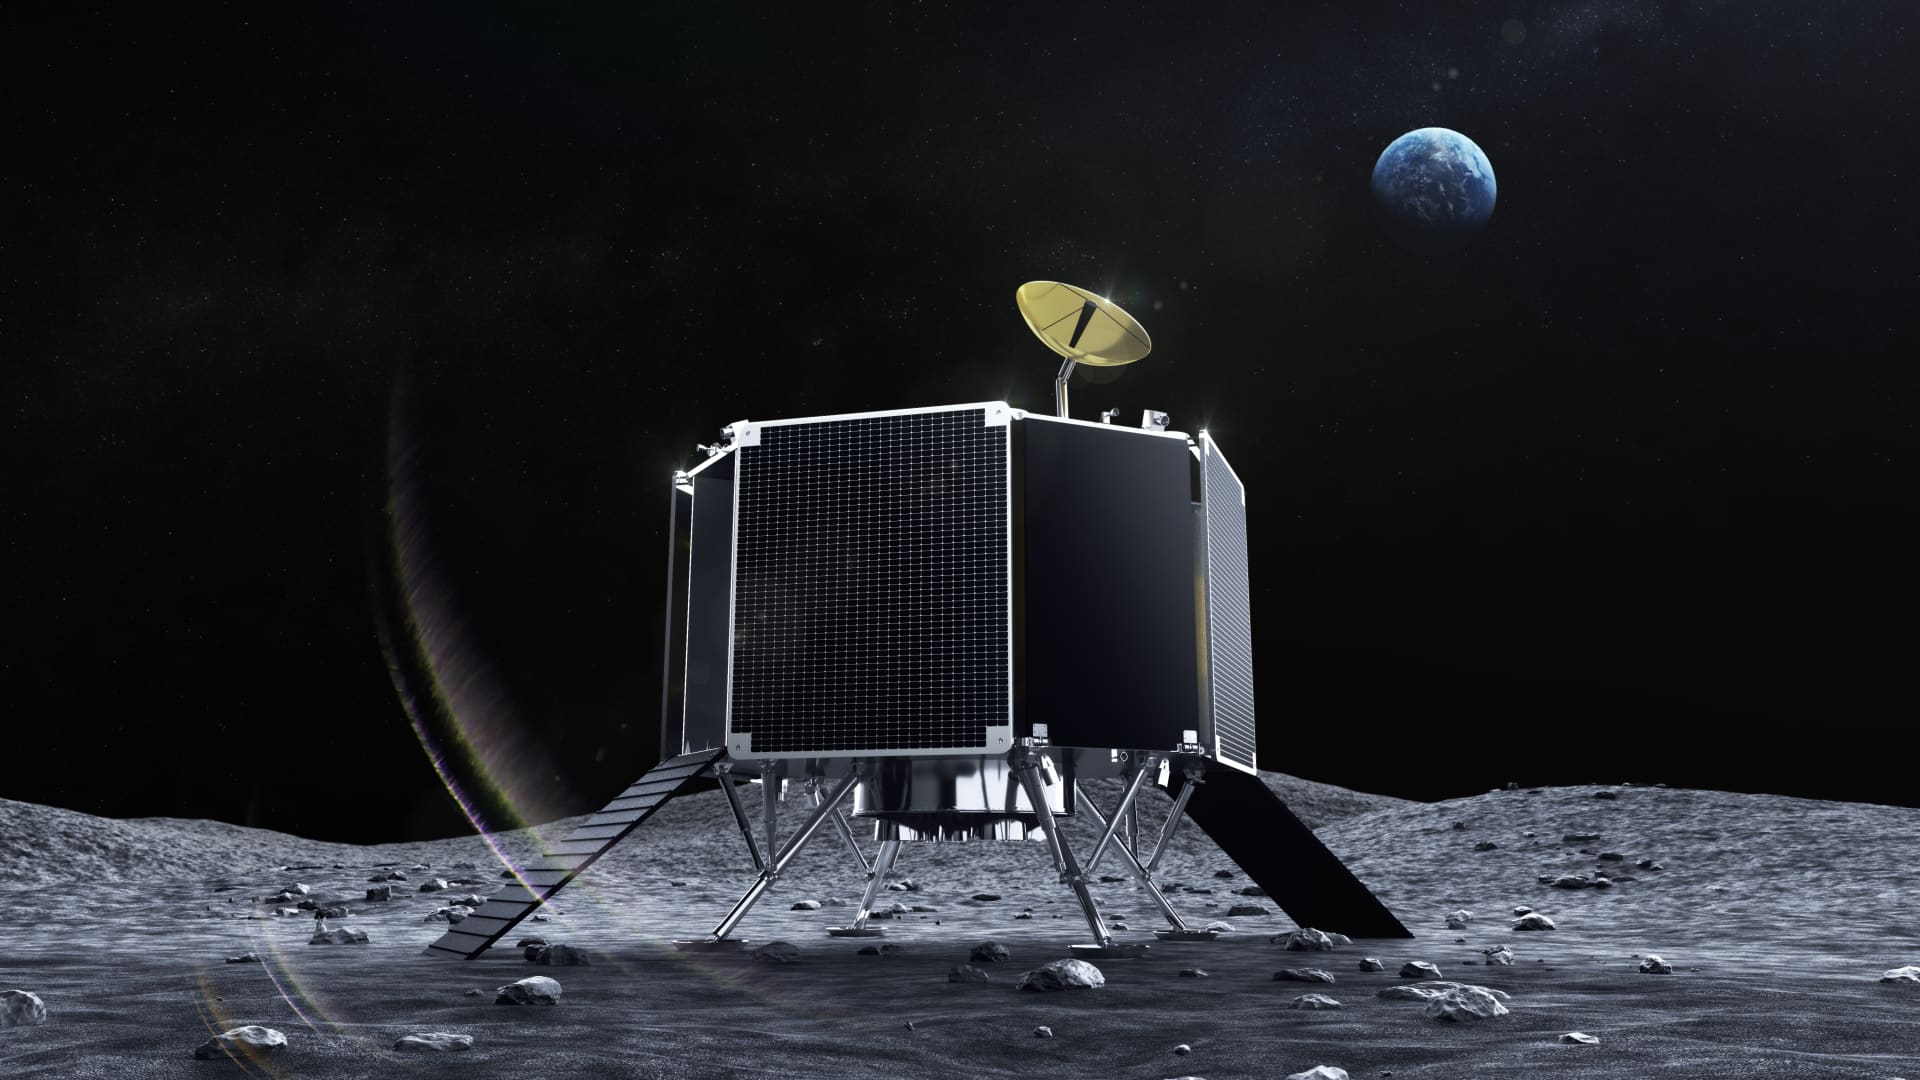 A rendering of the Series2 cargo lunar lander on the moon's surface.